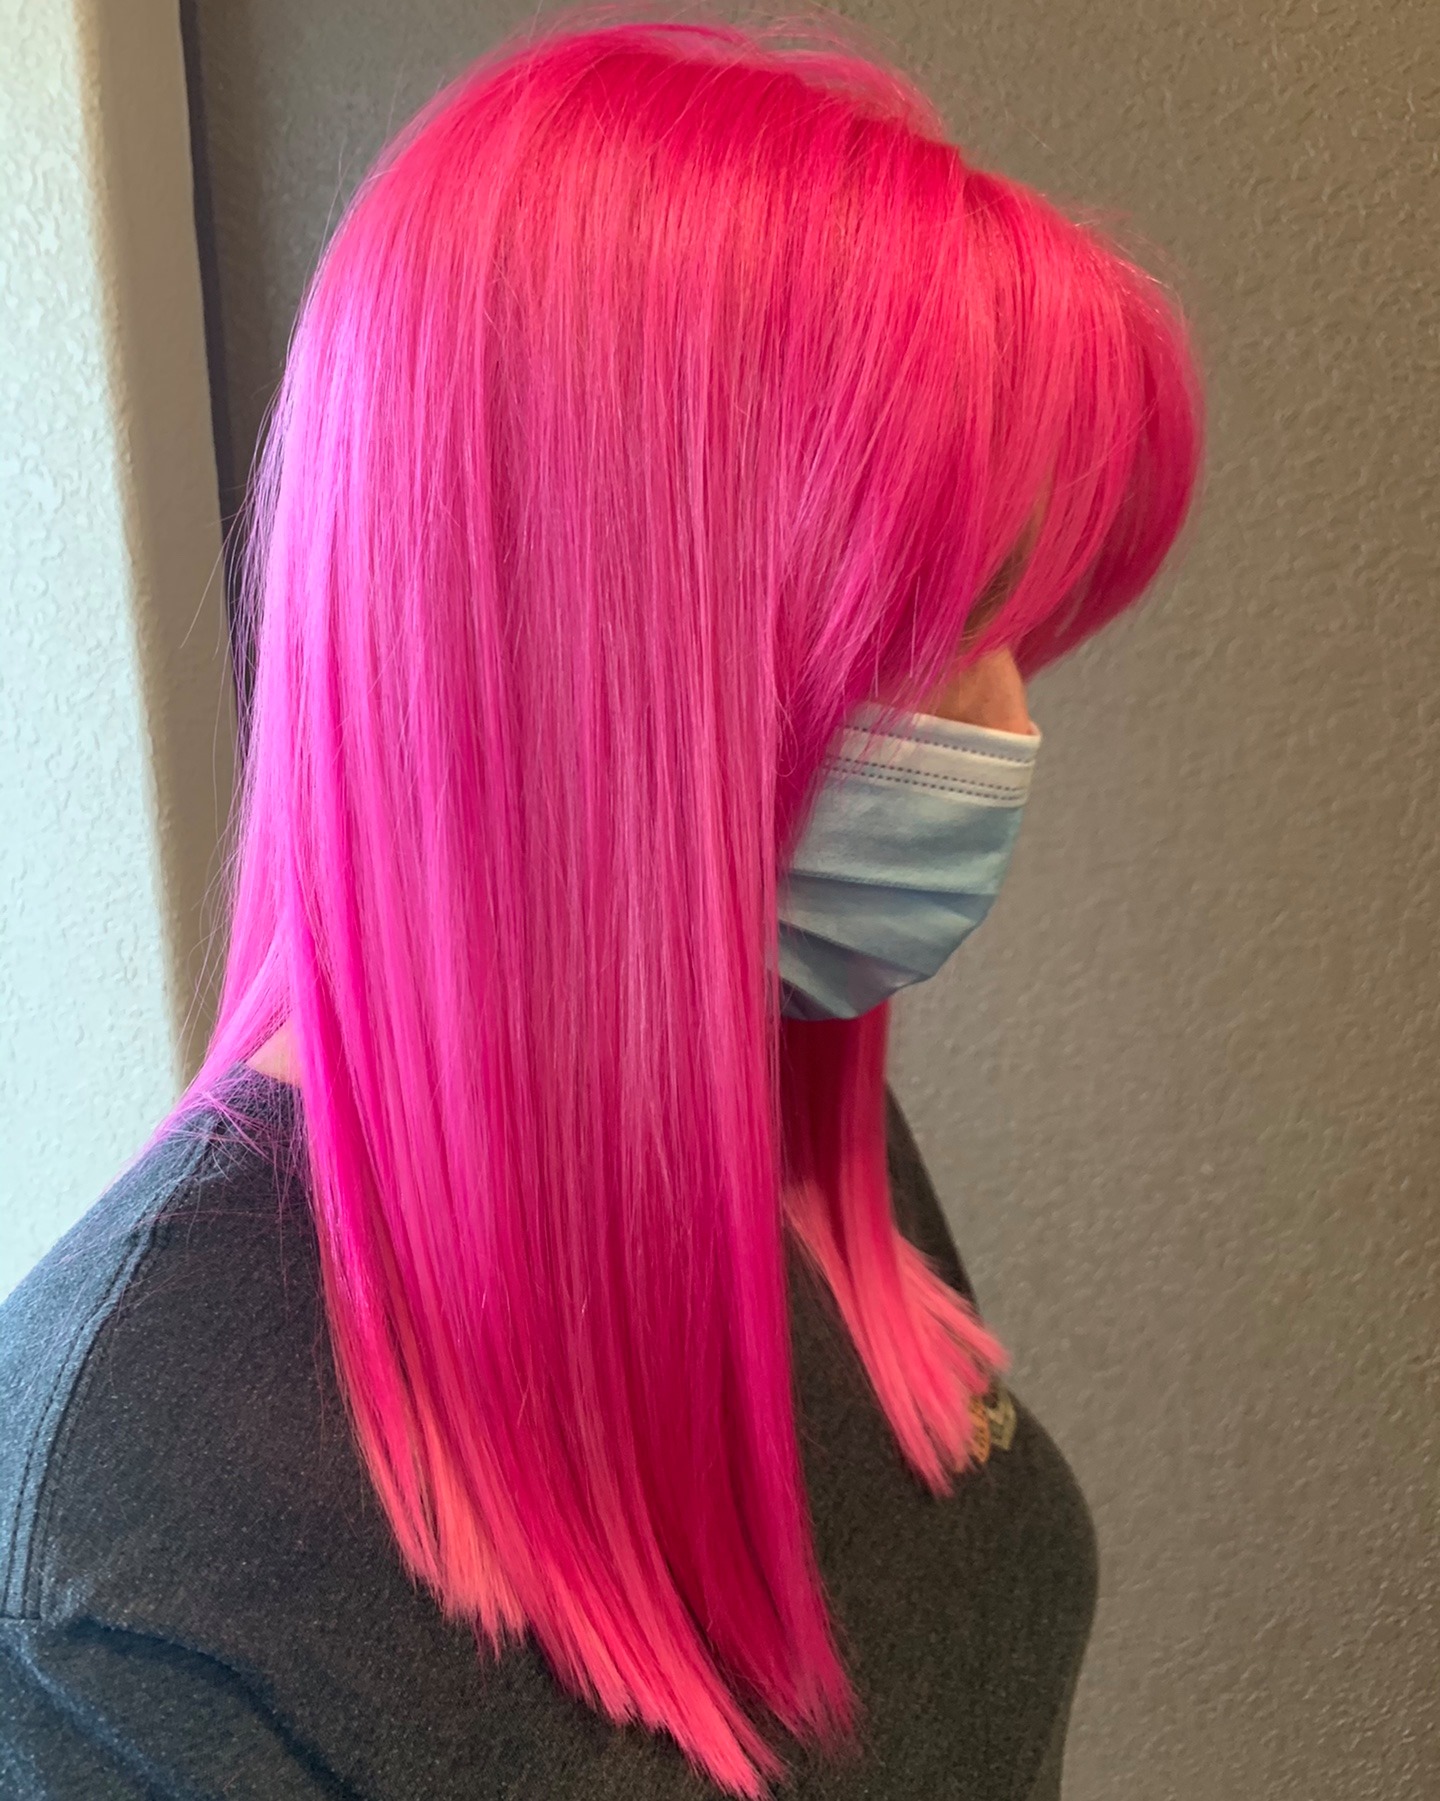 this is NOT a Wig nor is this a filter .... this is exactly the color of pink my client requested